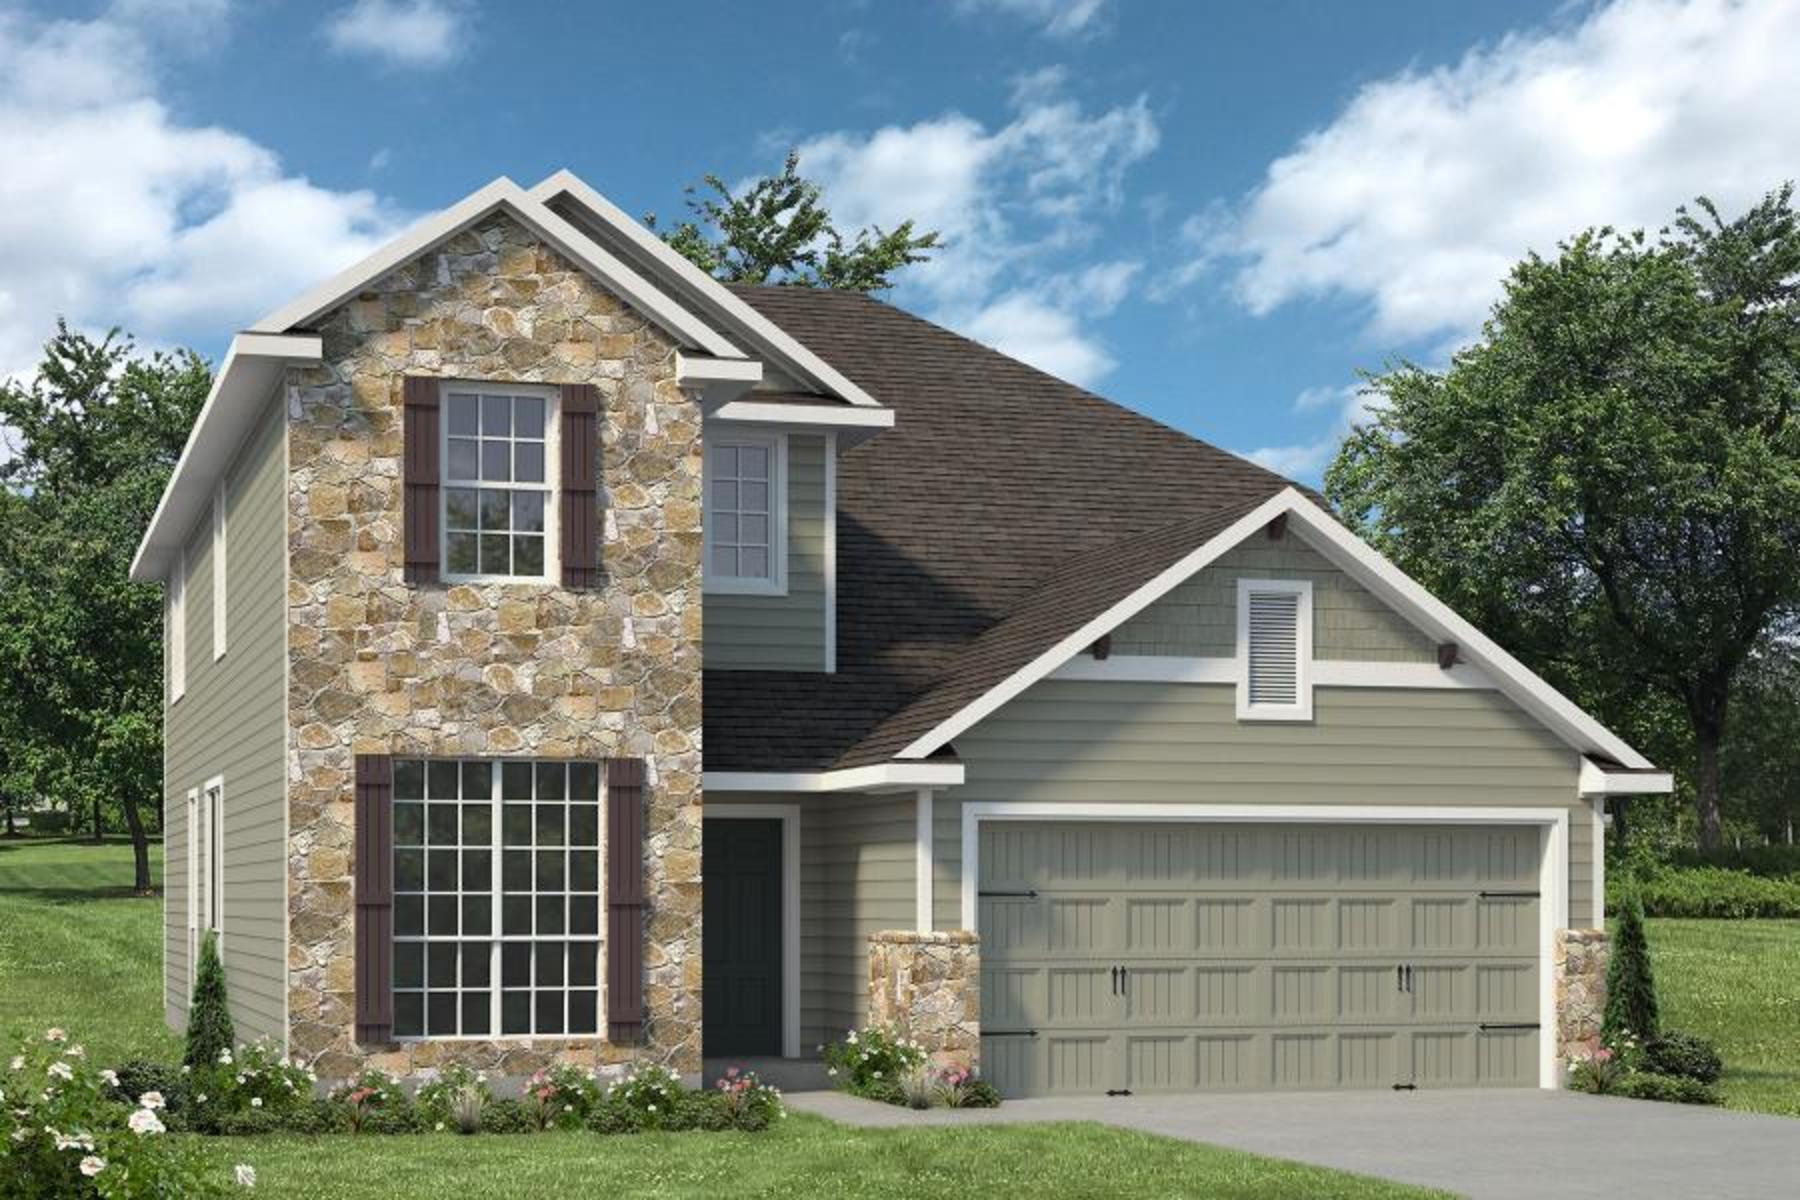 https://myhome.anewgo.com/client/stylecraft/community/Our%20Plans/plan/2697?elevId=56. Graham Home with 4 Bedrooms